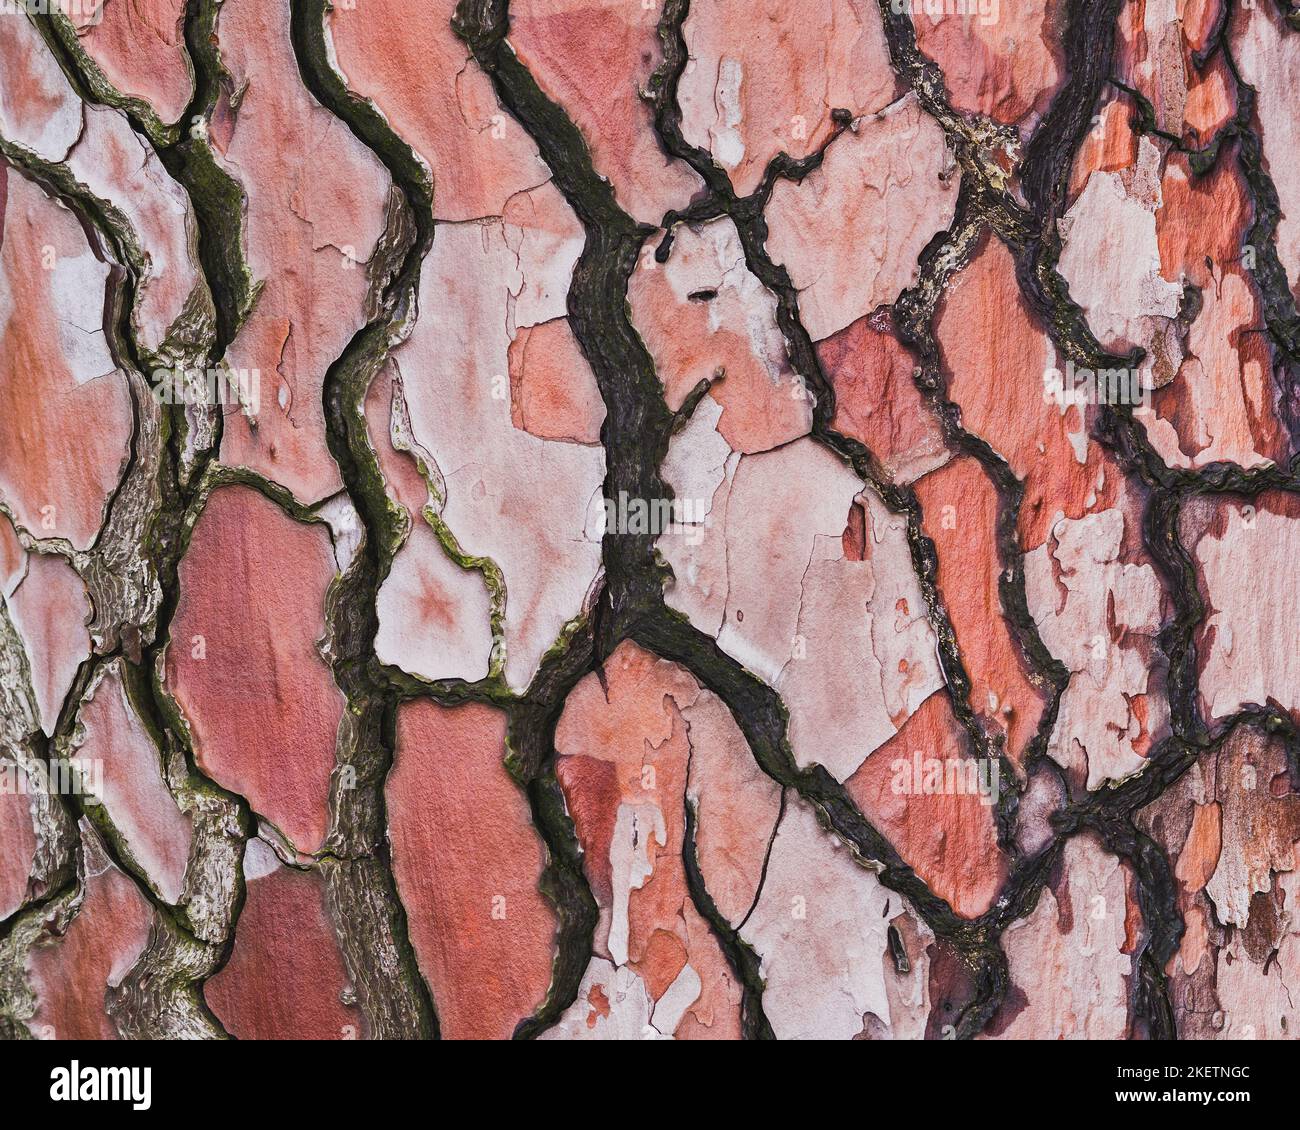 Old wood bark texture or background. Red pine tree. Stock Photo